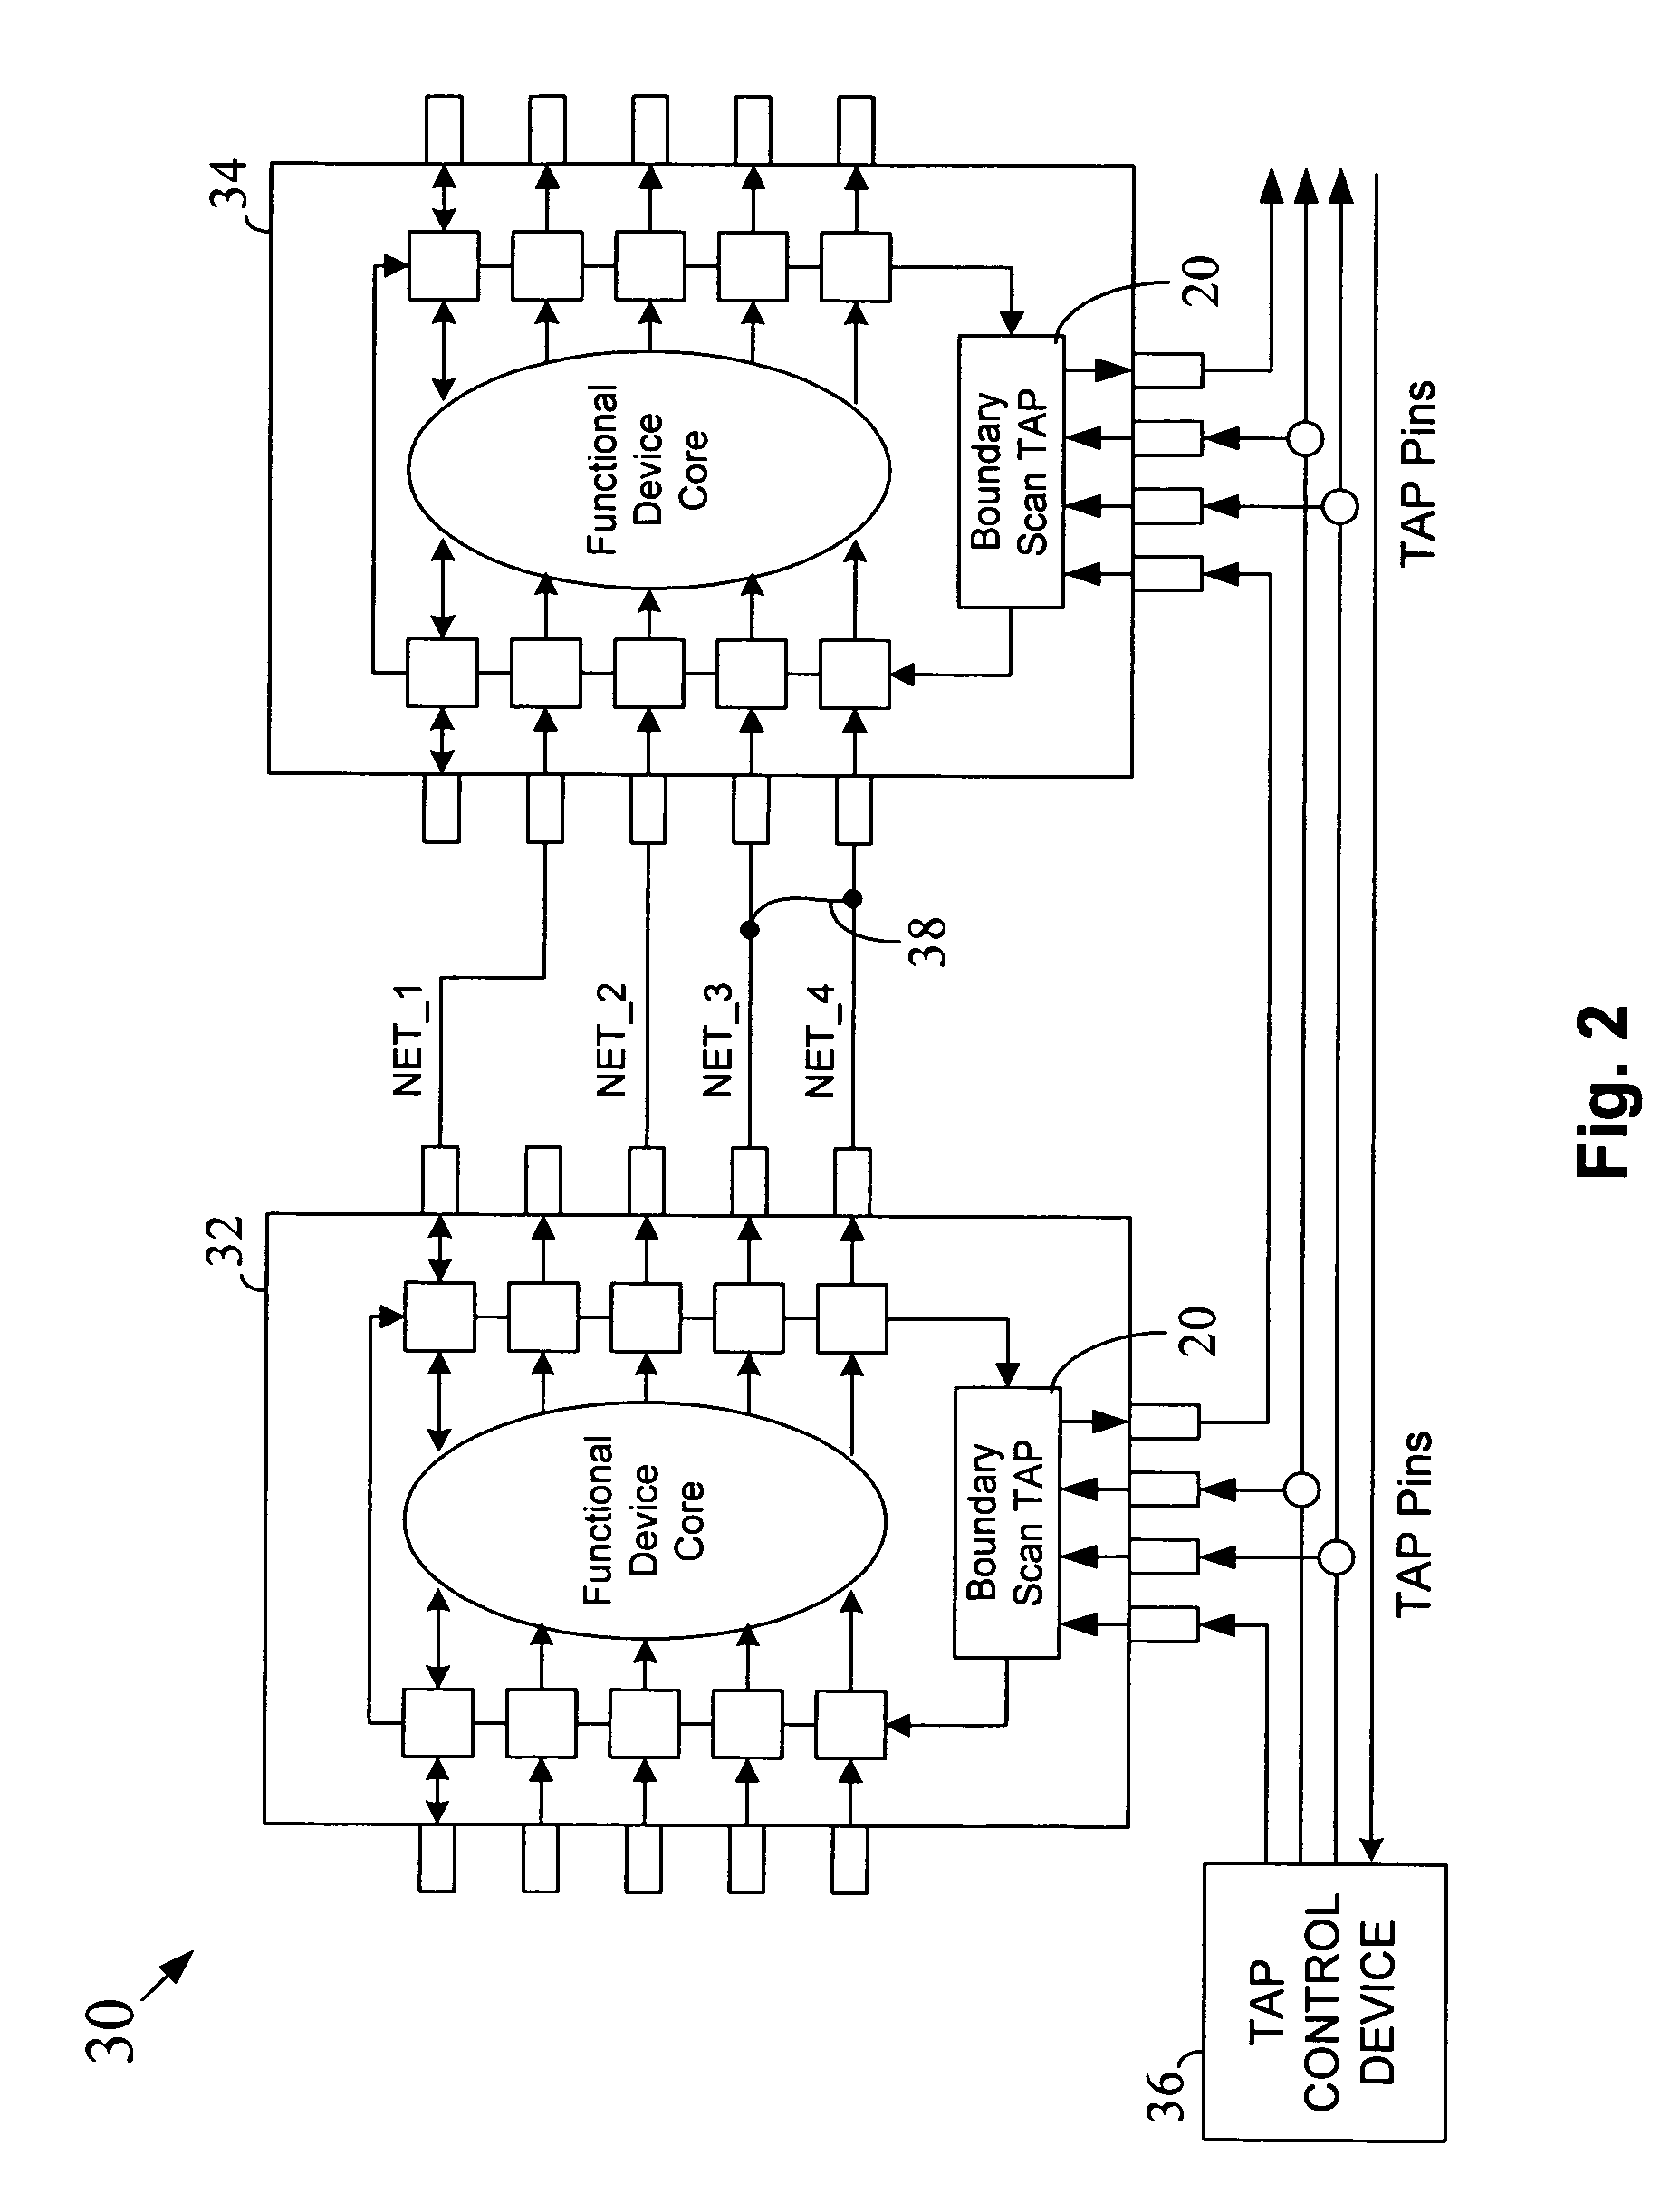 Apparatus for use in detecting circuit faults during boundary scan testing